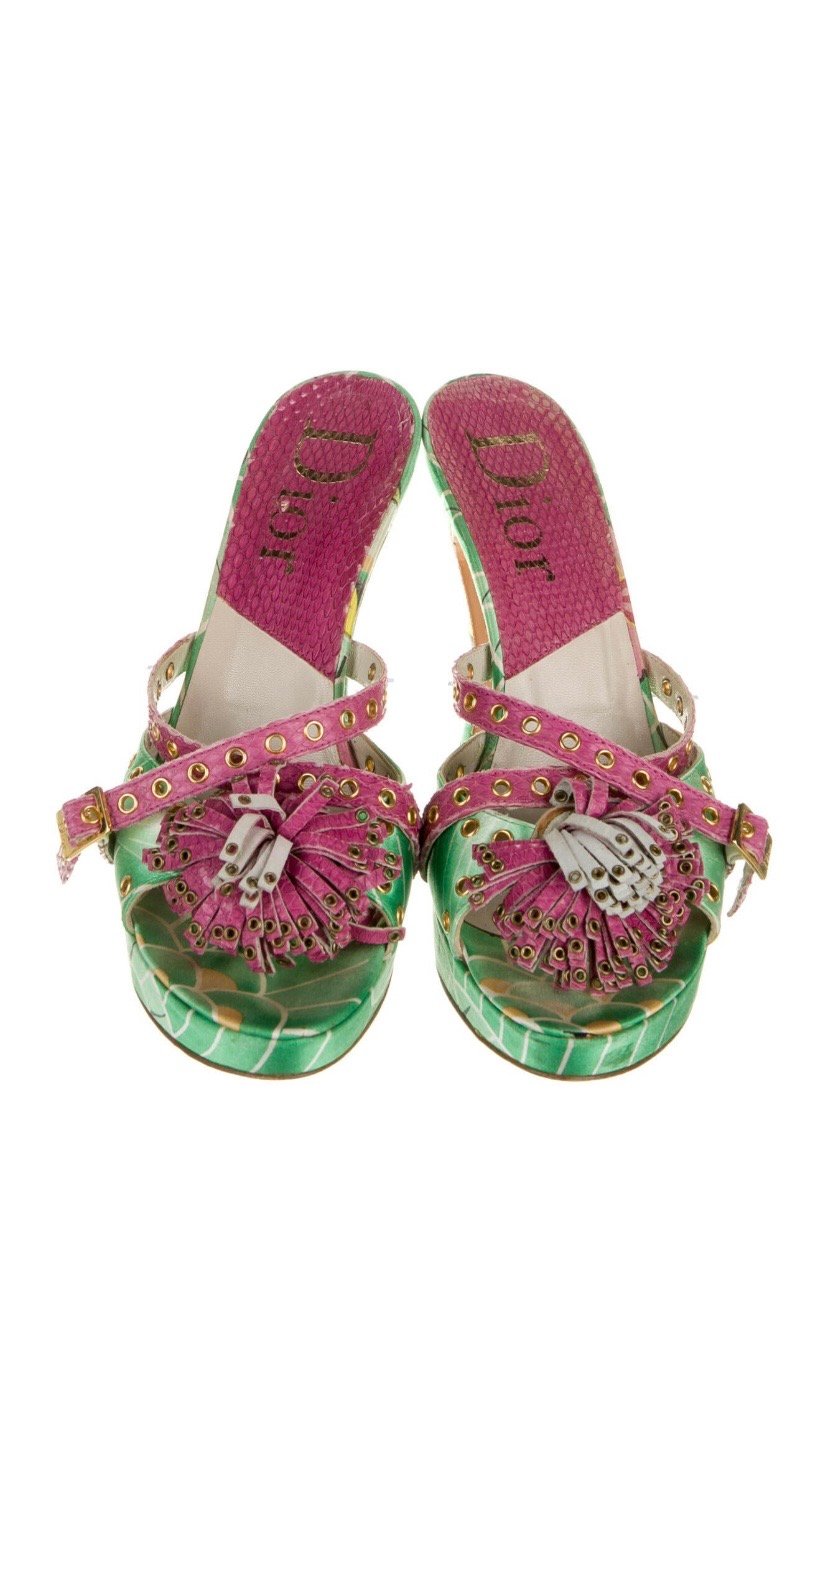 Image of DIOR by JOHN GALLIANO SANDALS 